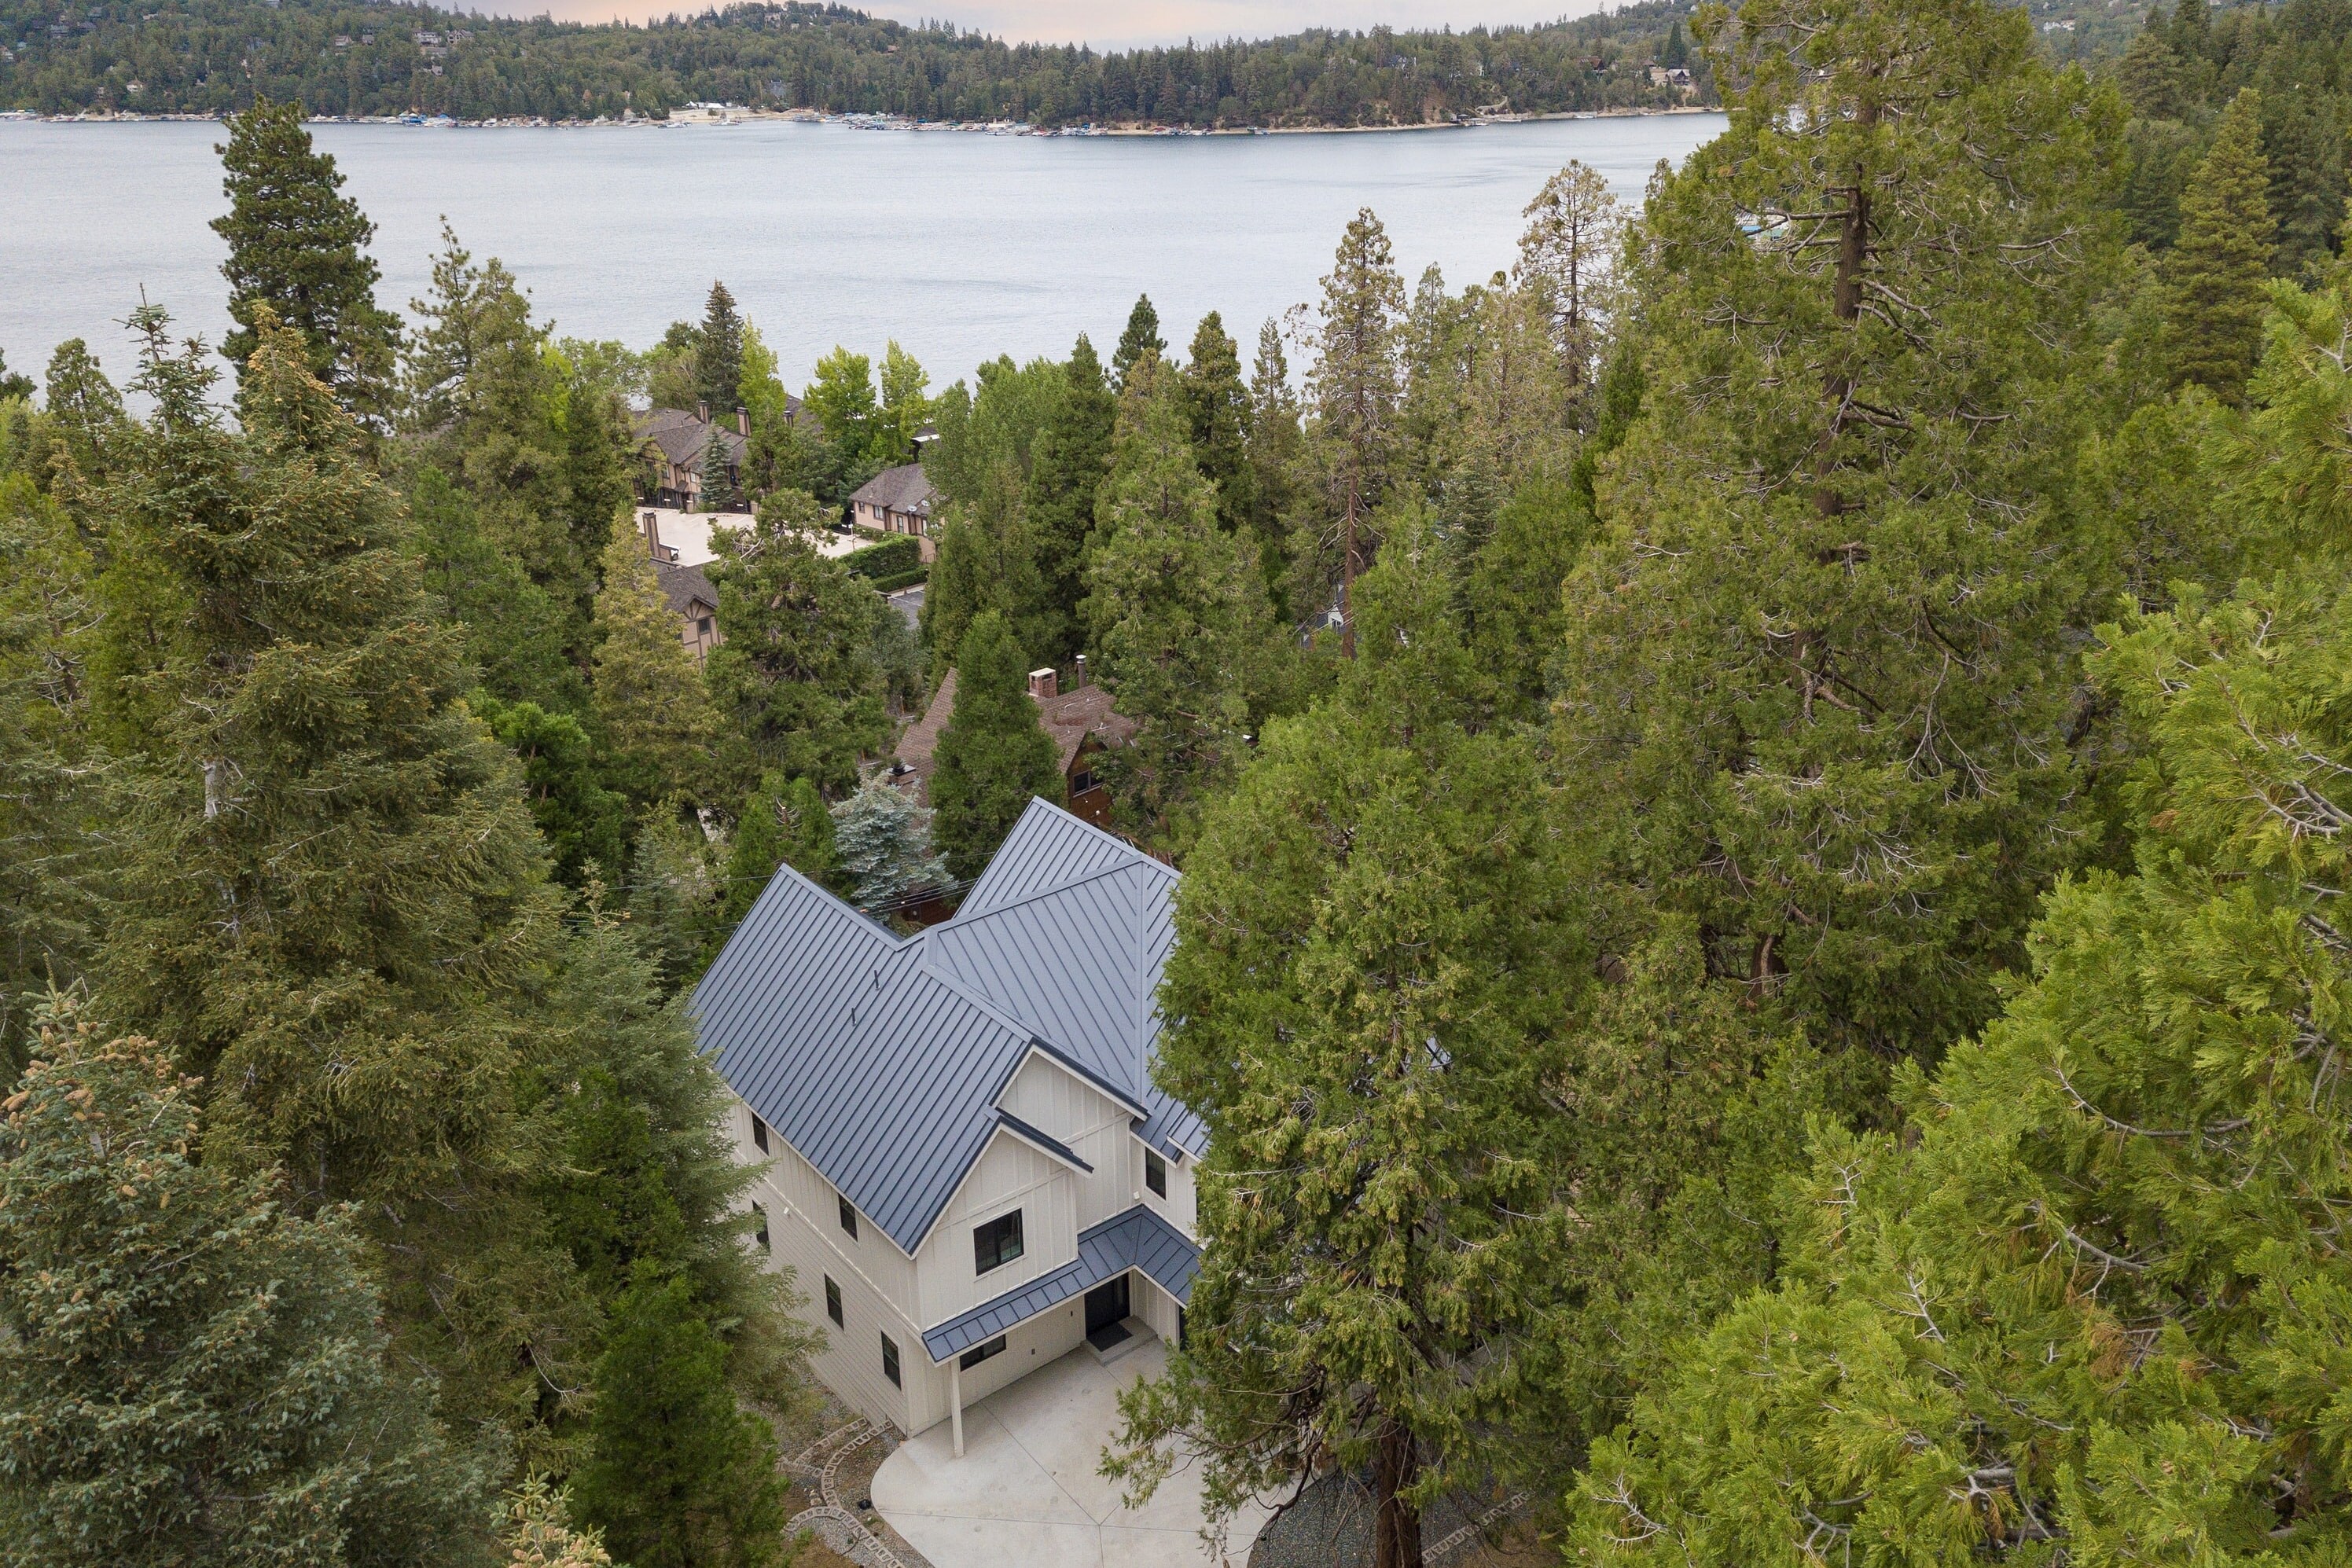 Minutes from the shores of Lake Arrowhead!